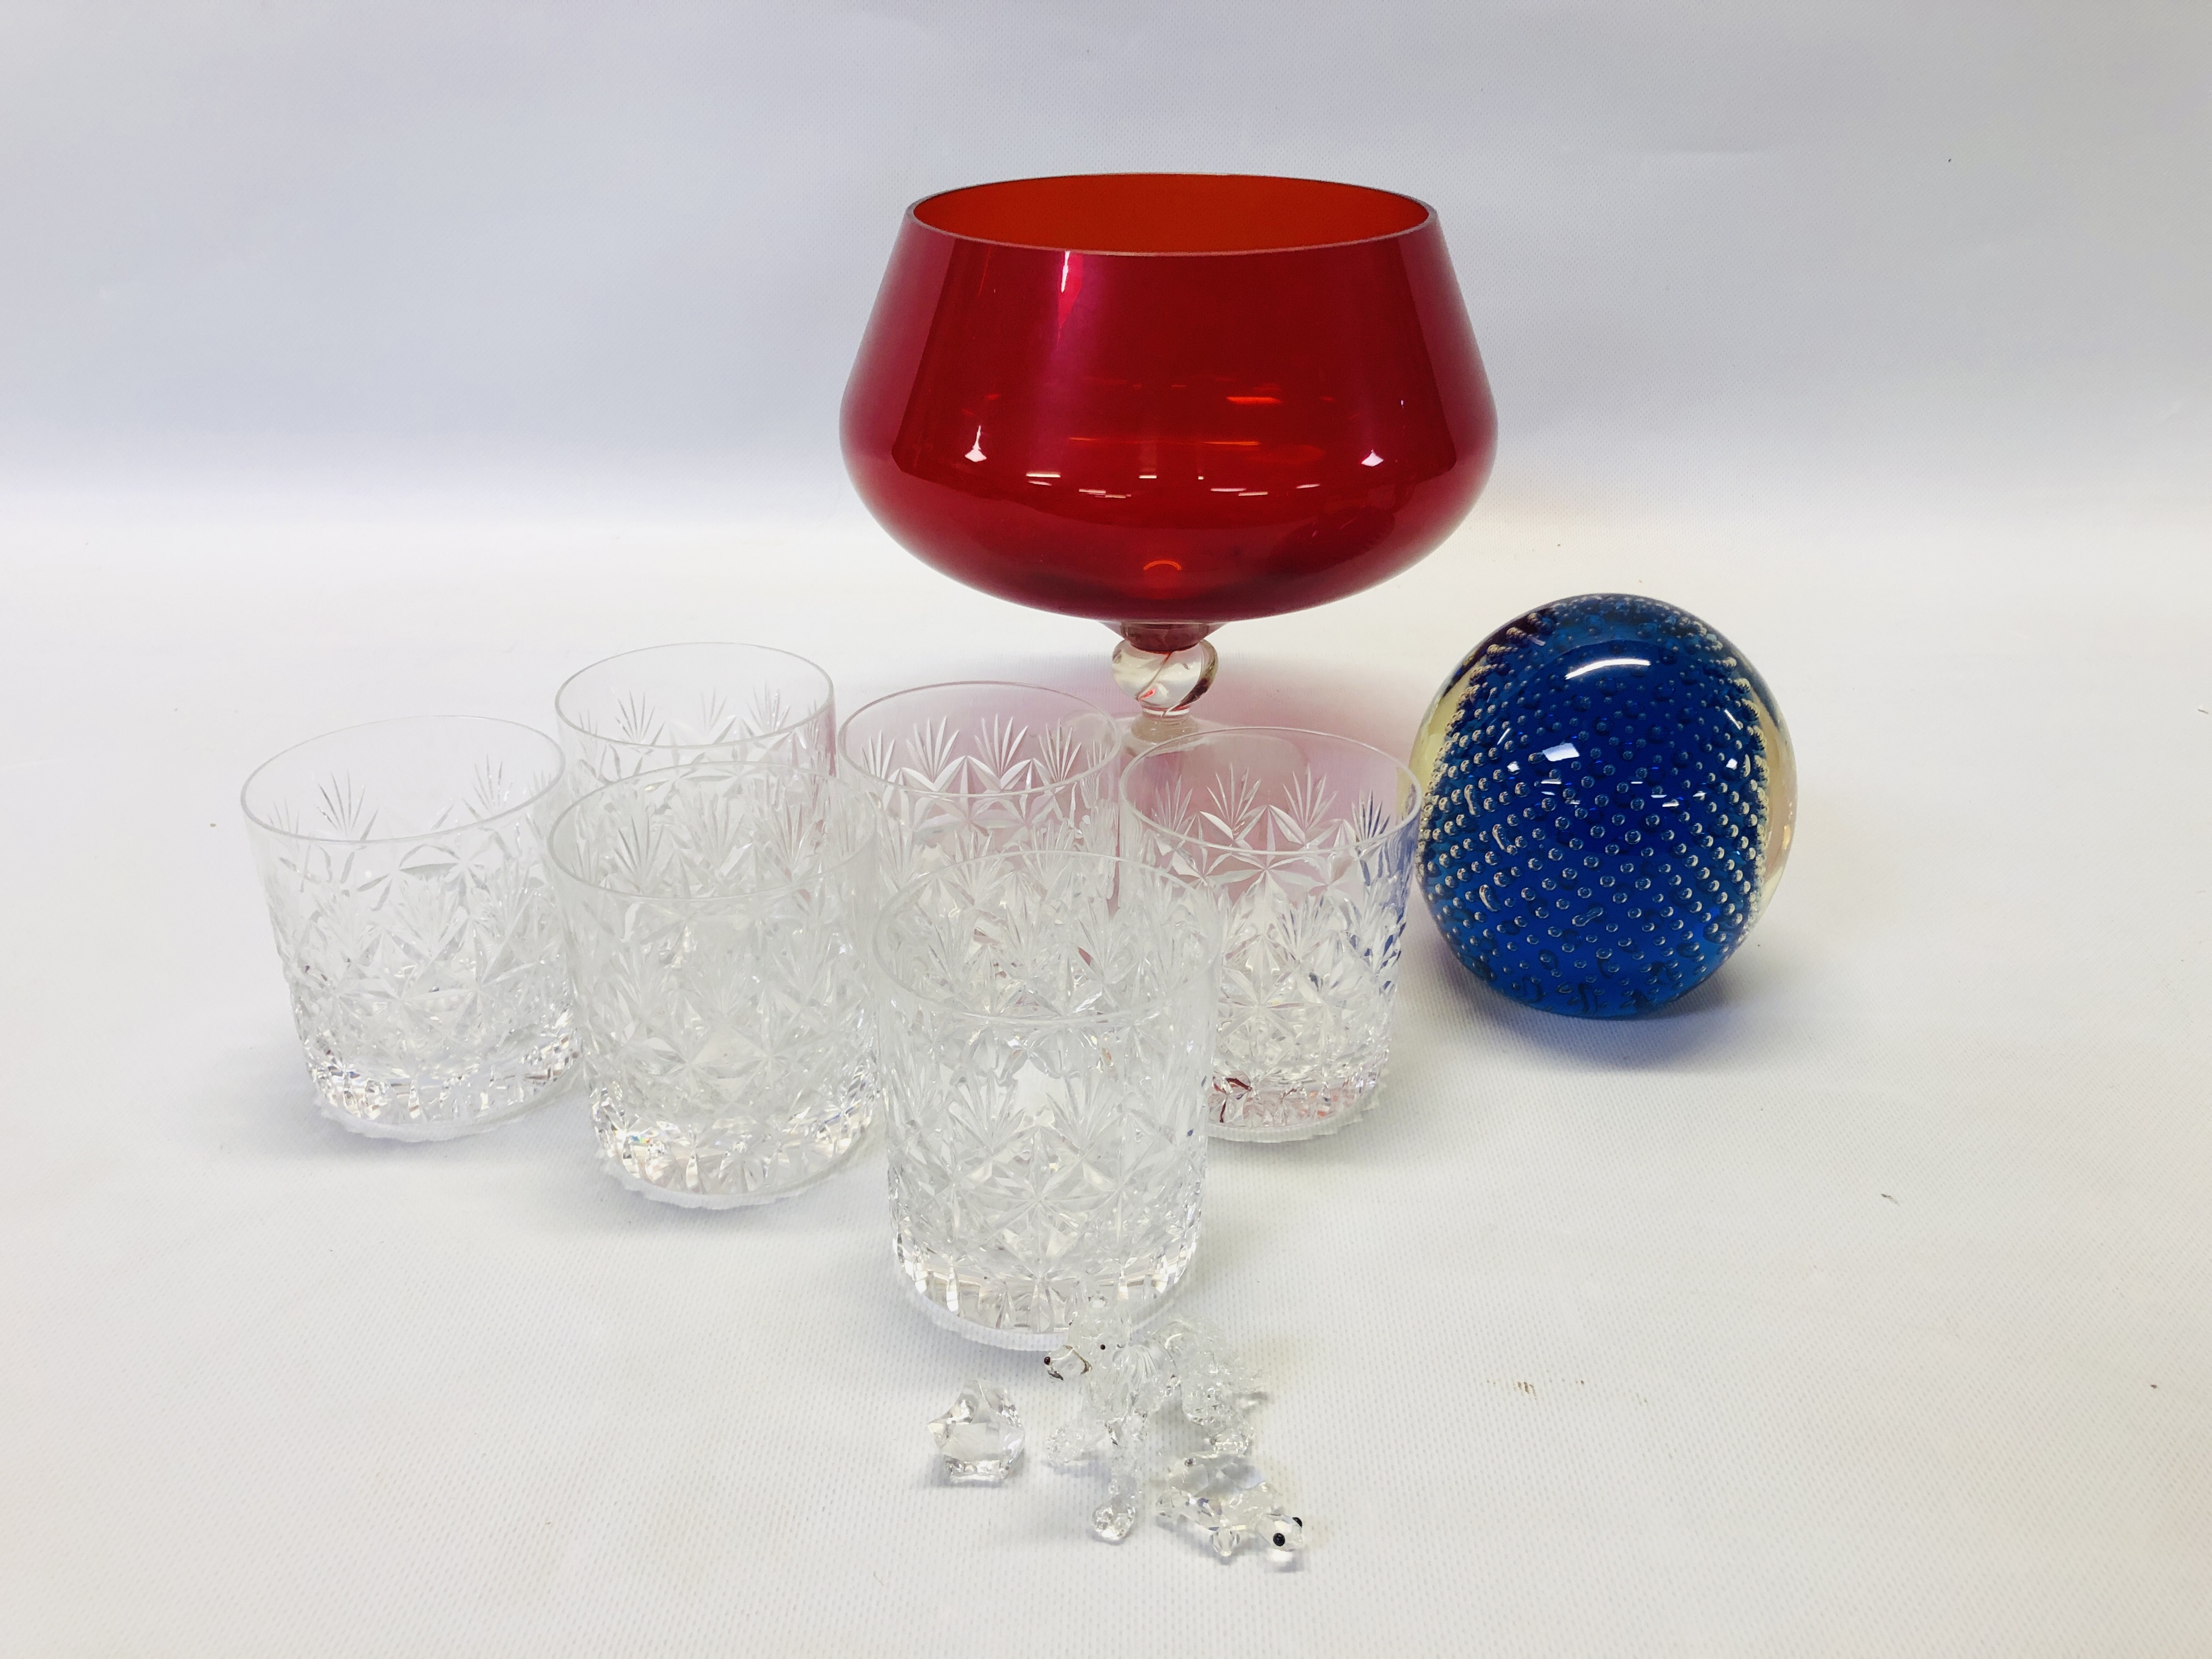 A LARGE ART GLASS PAPERWEIGHT H 12CM ALONG WITH A SET OF 6 CRYSTAL TUMBLERS + RED GLASS SINGLE